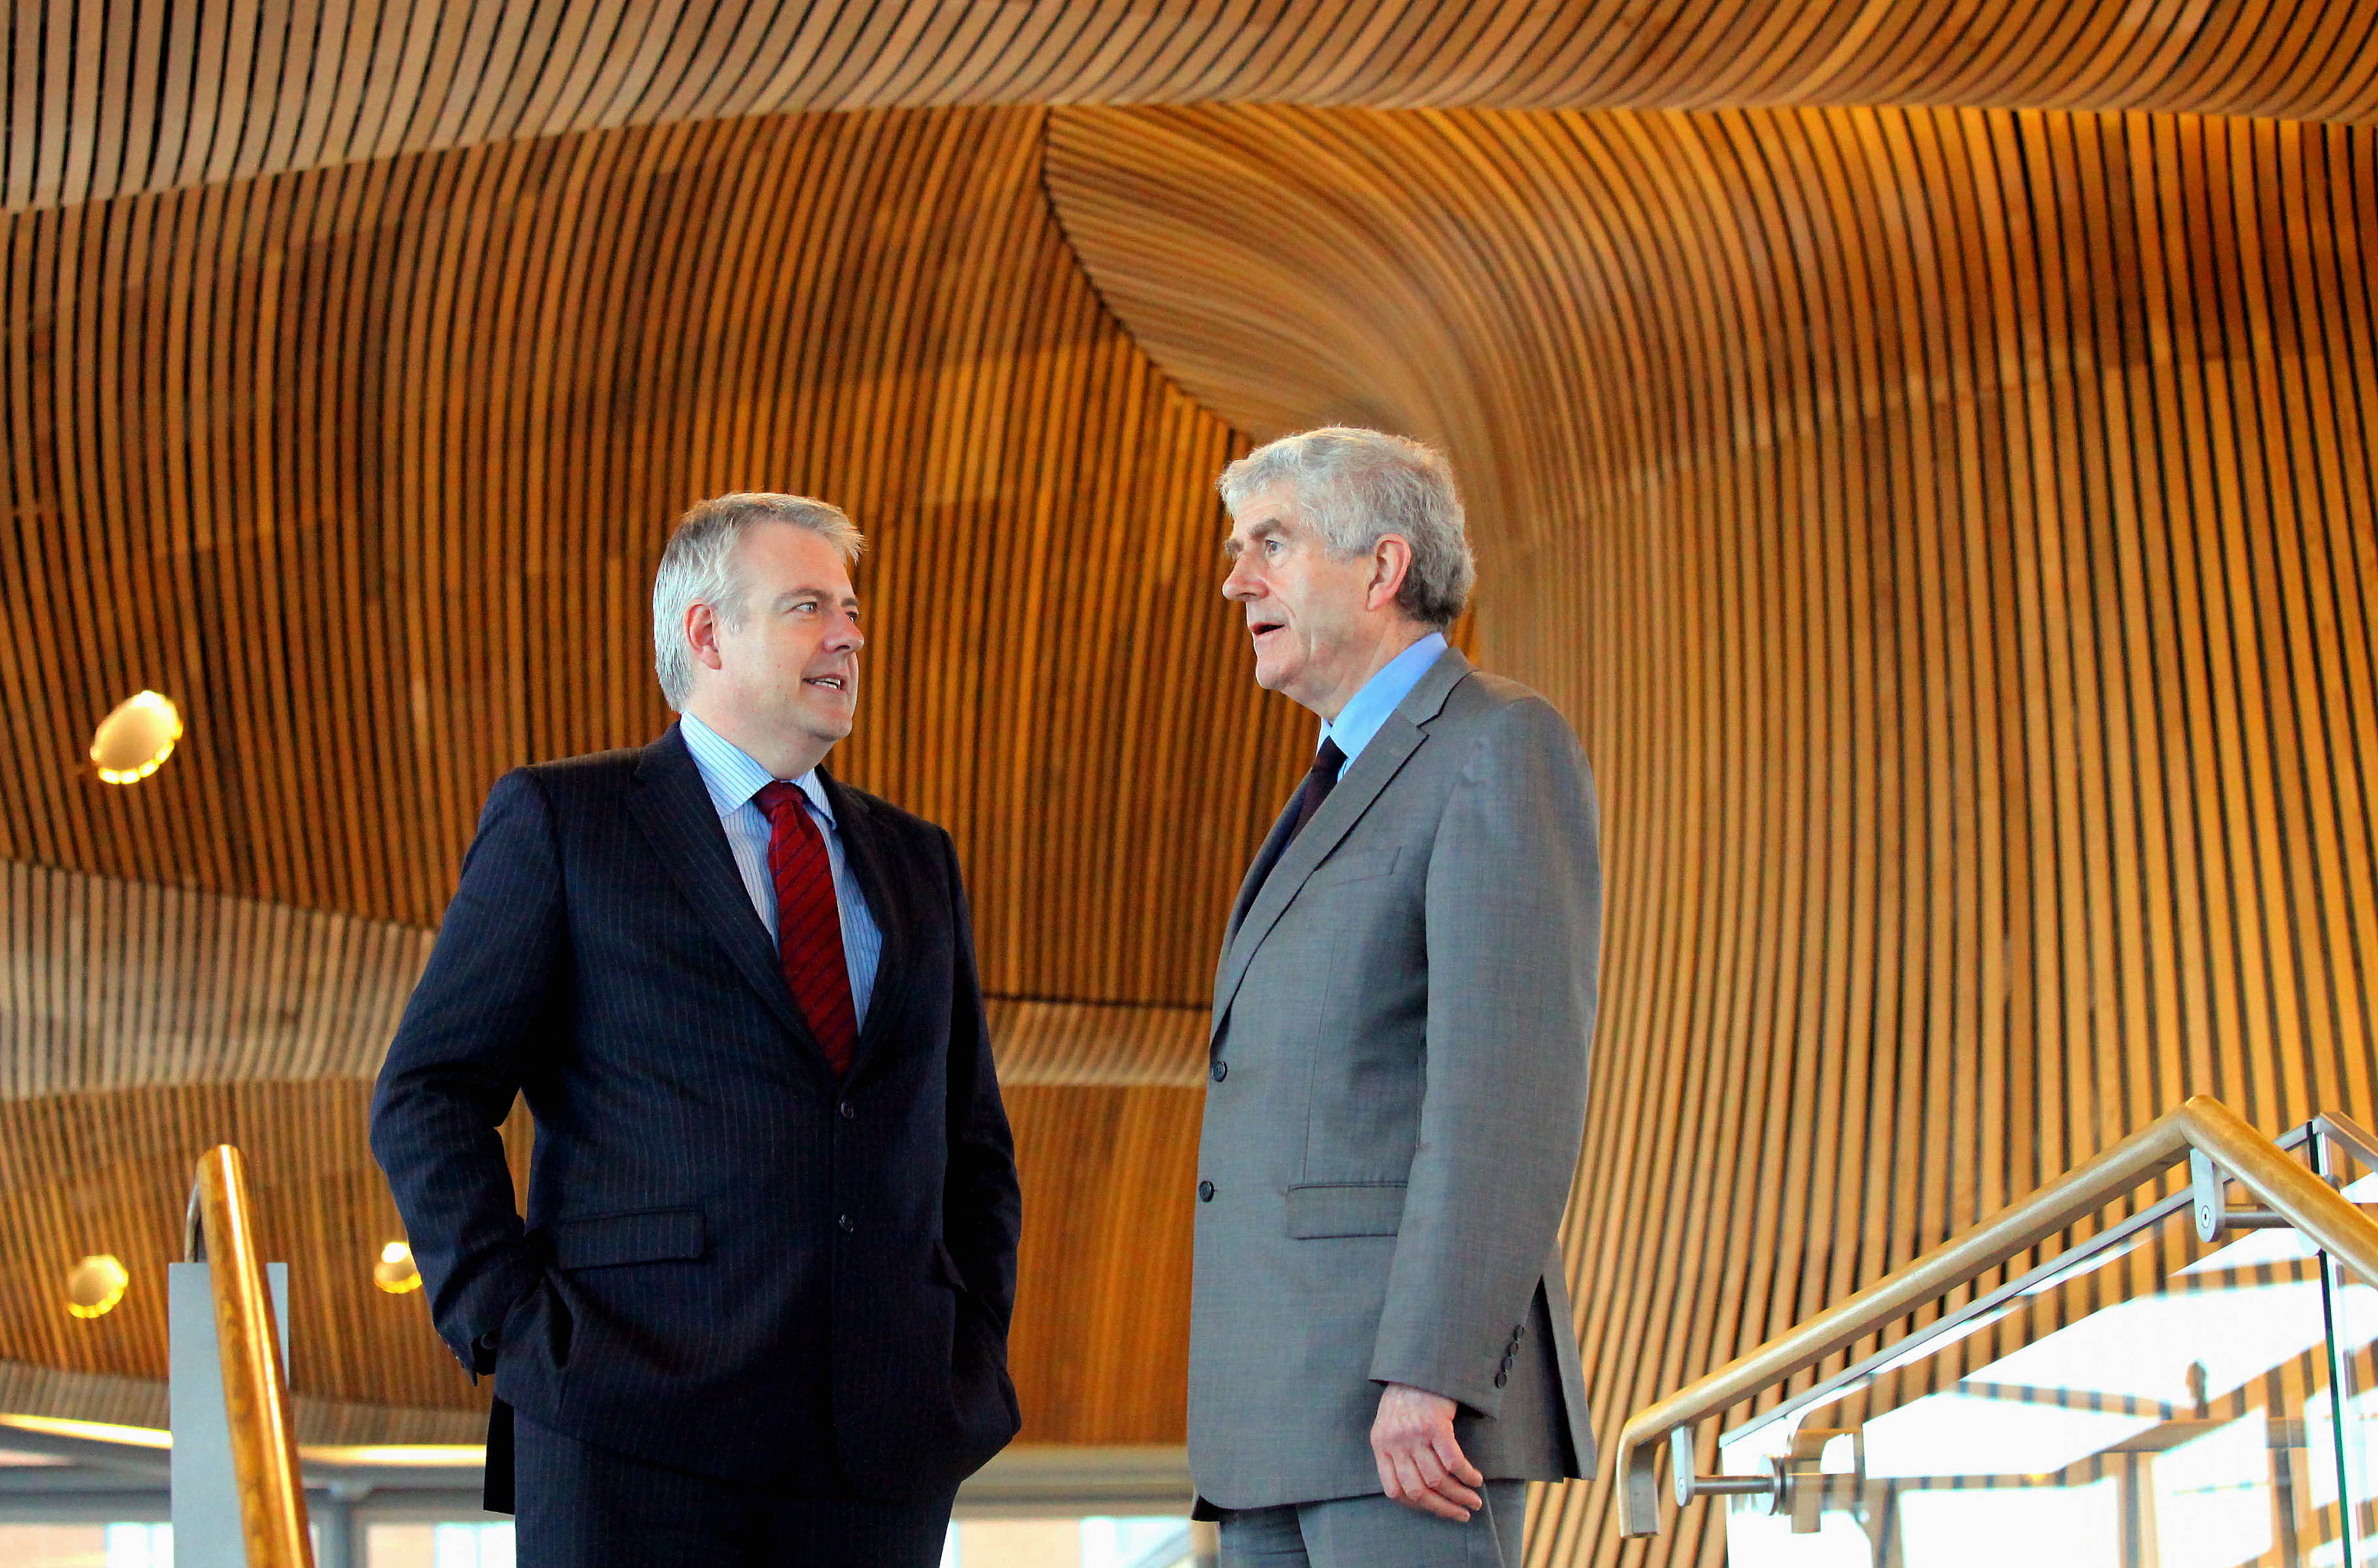 Rhodri Morgan (R) with successor Carwyn Jones (L) in the Senedd Cardiff Bay. Last day in office for First Minister for Wales Rhodri Morgan at the Welsh Assembly Government where he took part in First Minister Questions at the Chambers in the Senedd at Cardiff Bay for the last time, to be succeeded by Carwyn Jones Assembly Member for Bridgend.